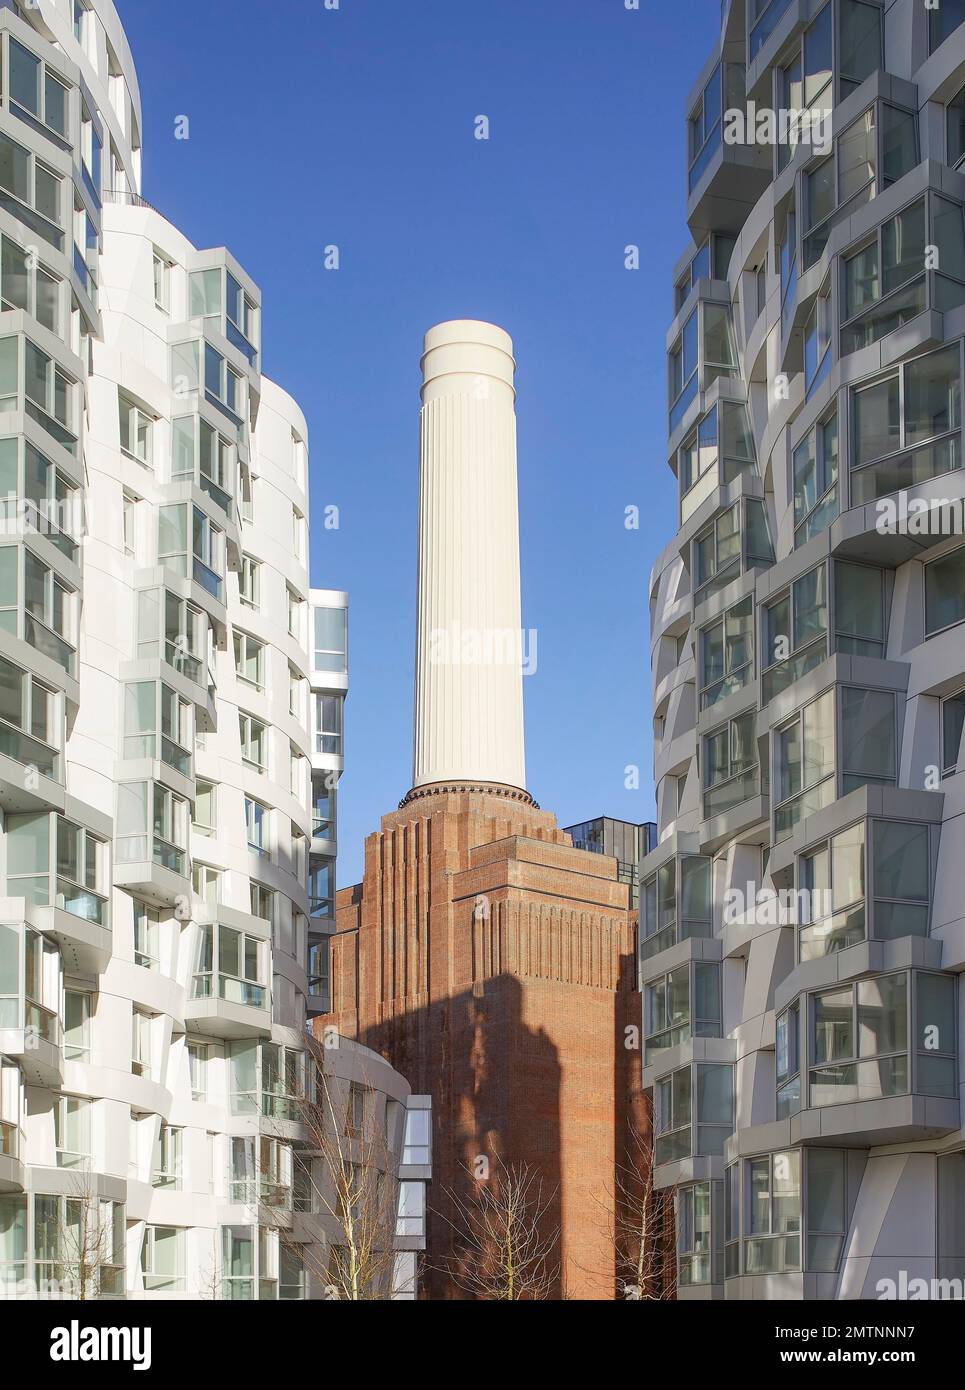 Prospect Place in juxtaposition to iconic Battersea Power Station building. Prospect Place Battersea Power Station Frank Gehry, London, United Kingdom Stock Photo